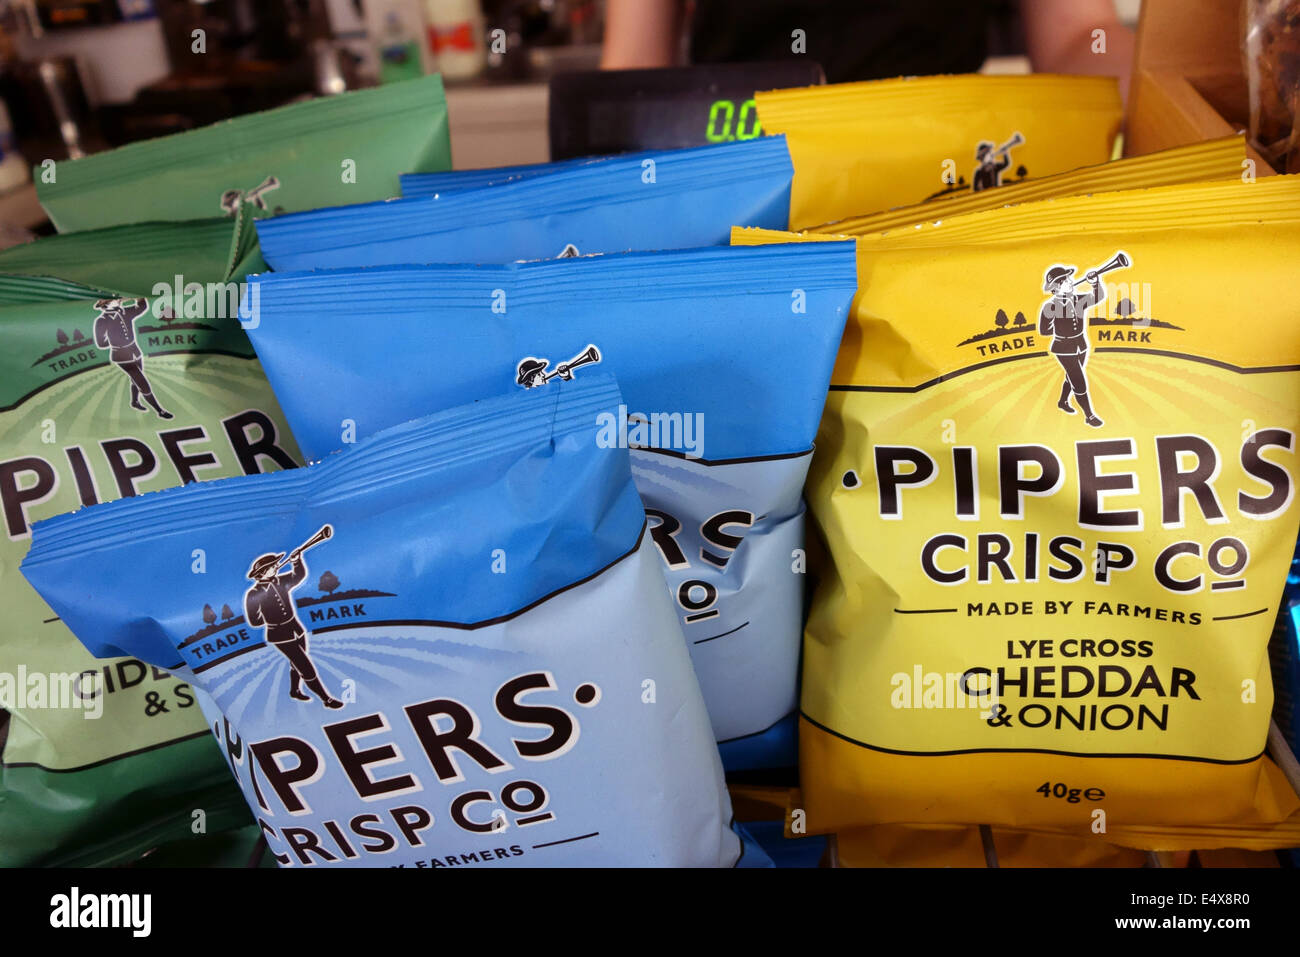 Pipers Crisp Co brand crisps on sale in cafe, England Stock Photo